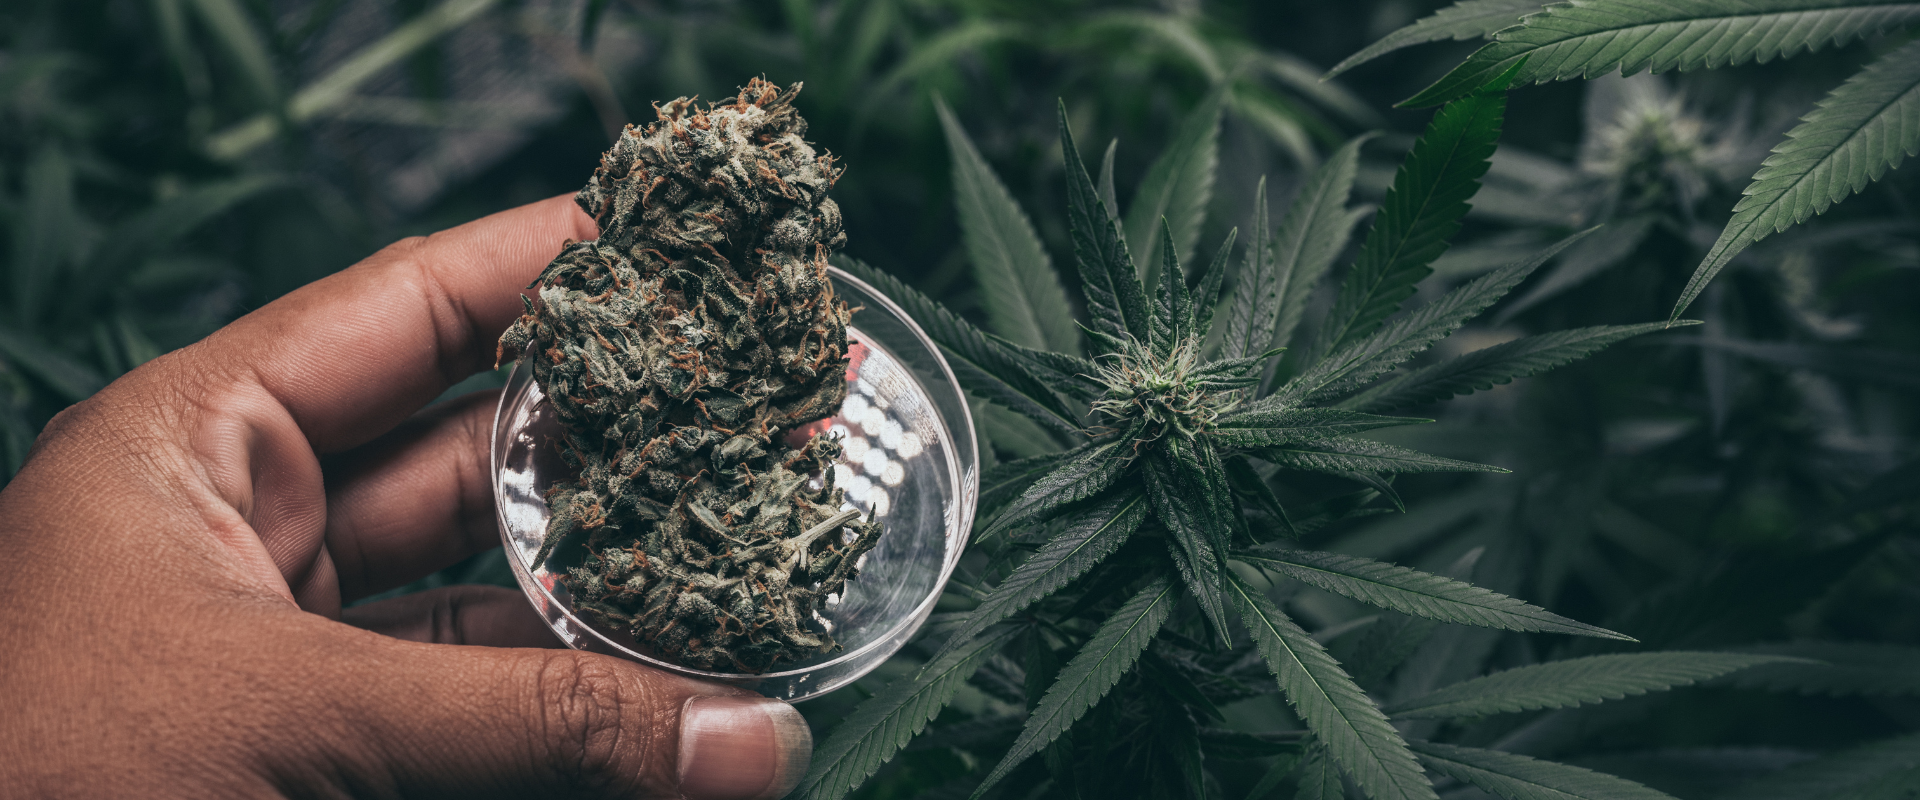 3 Tips to Keep Your Weed Fresh